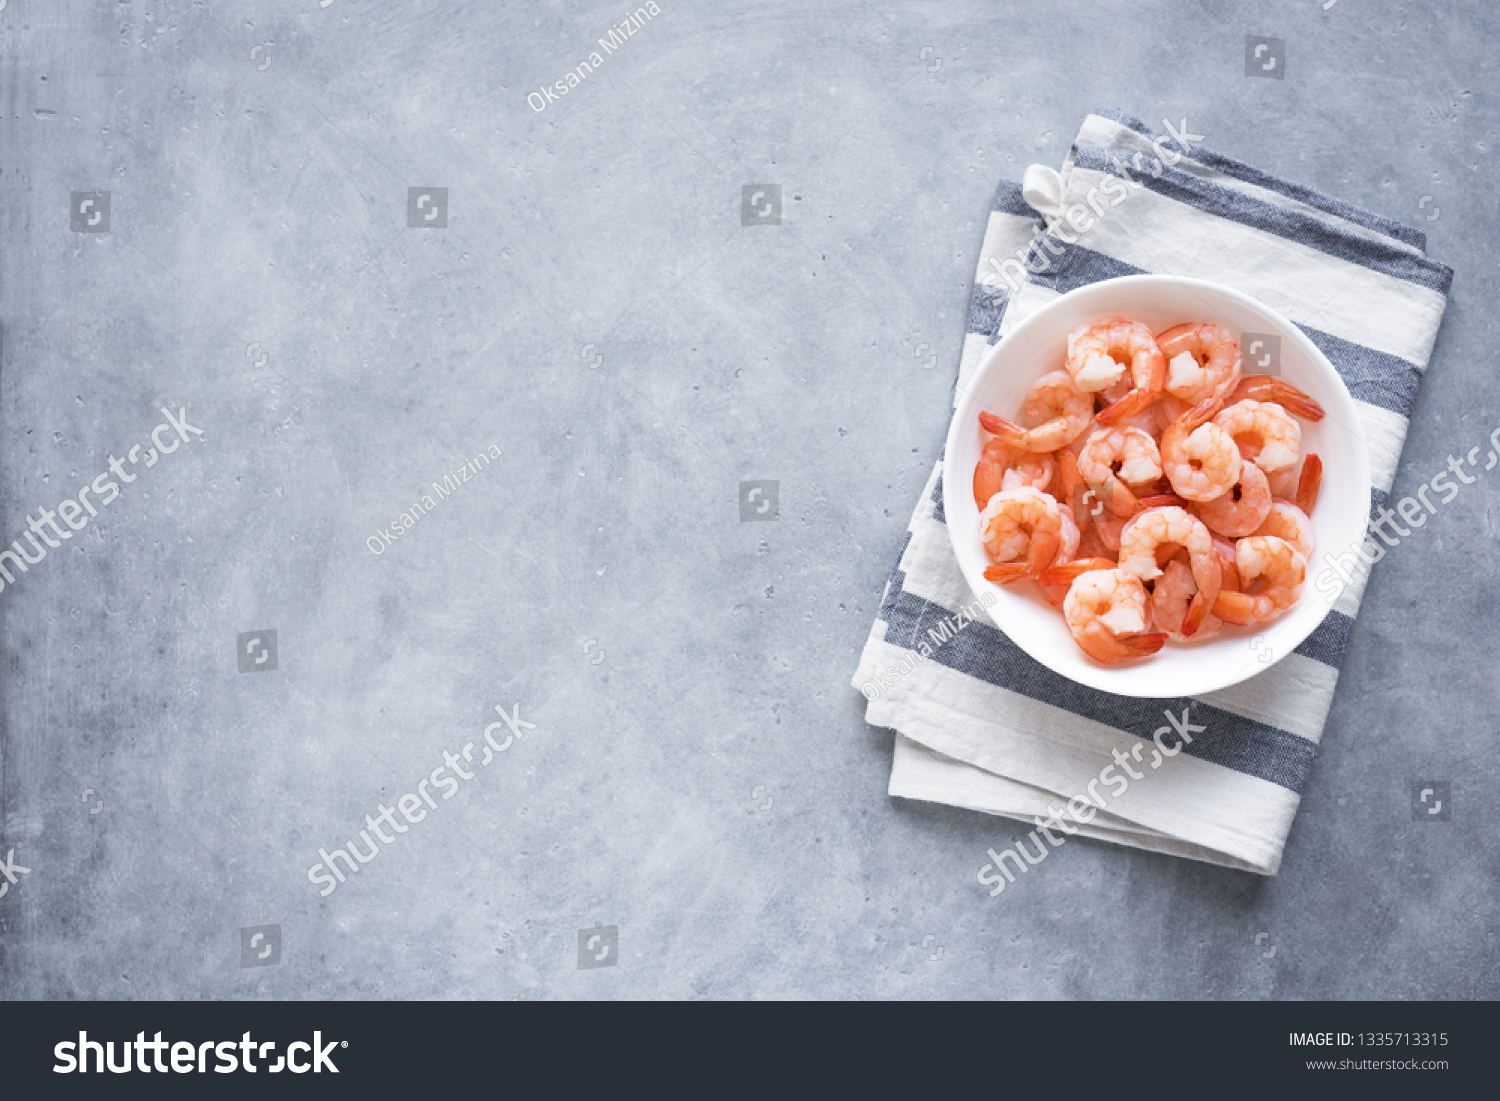 Shrimps, Prawns in bowl, top view, copy space. Fresh seafood ingredient - shrimp tails ready for cooking. Boiled prawns. #1335713315